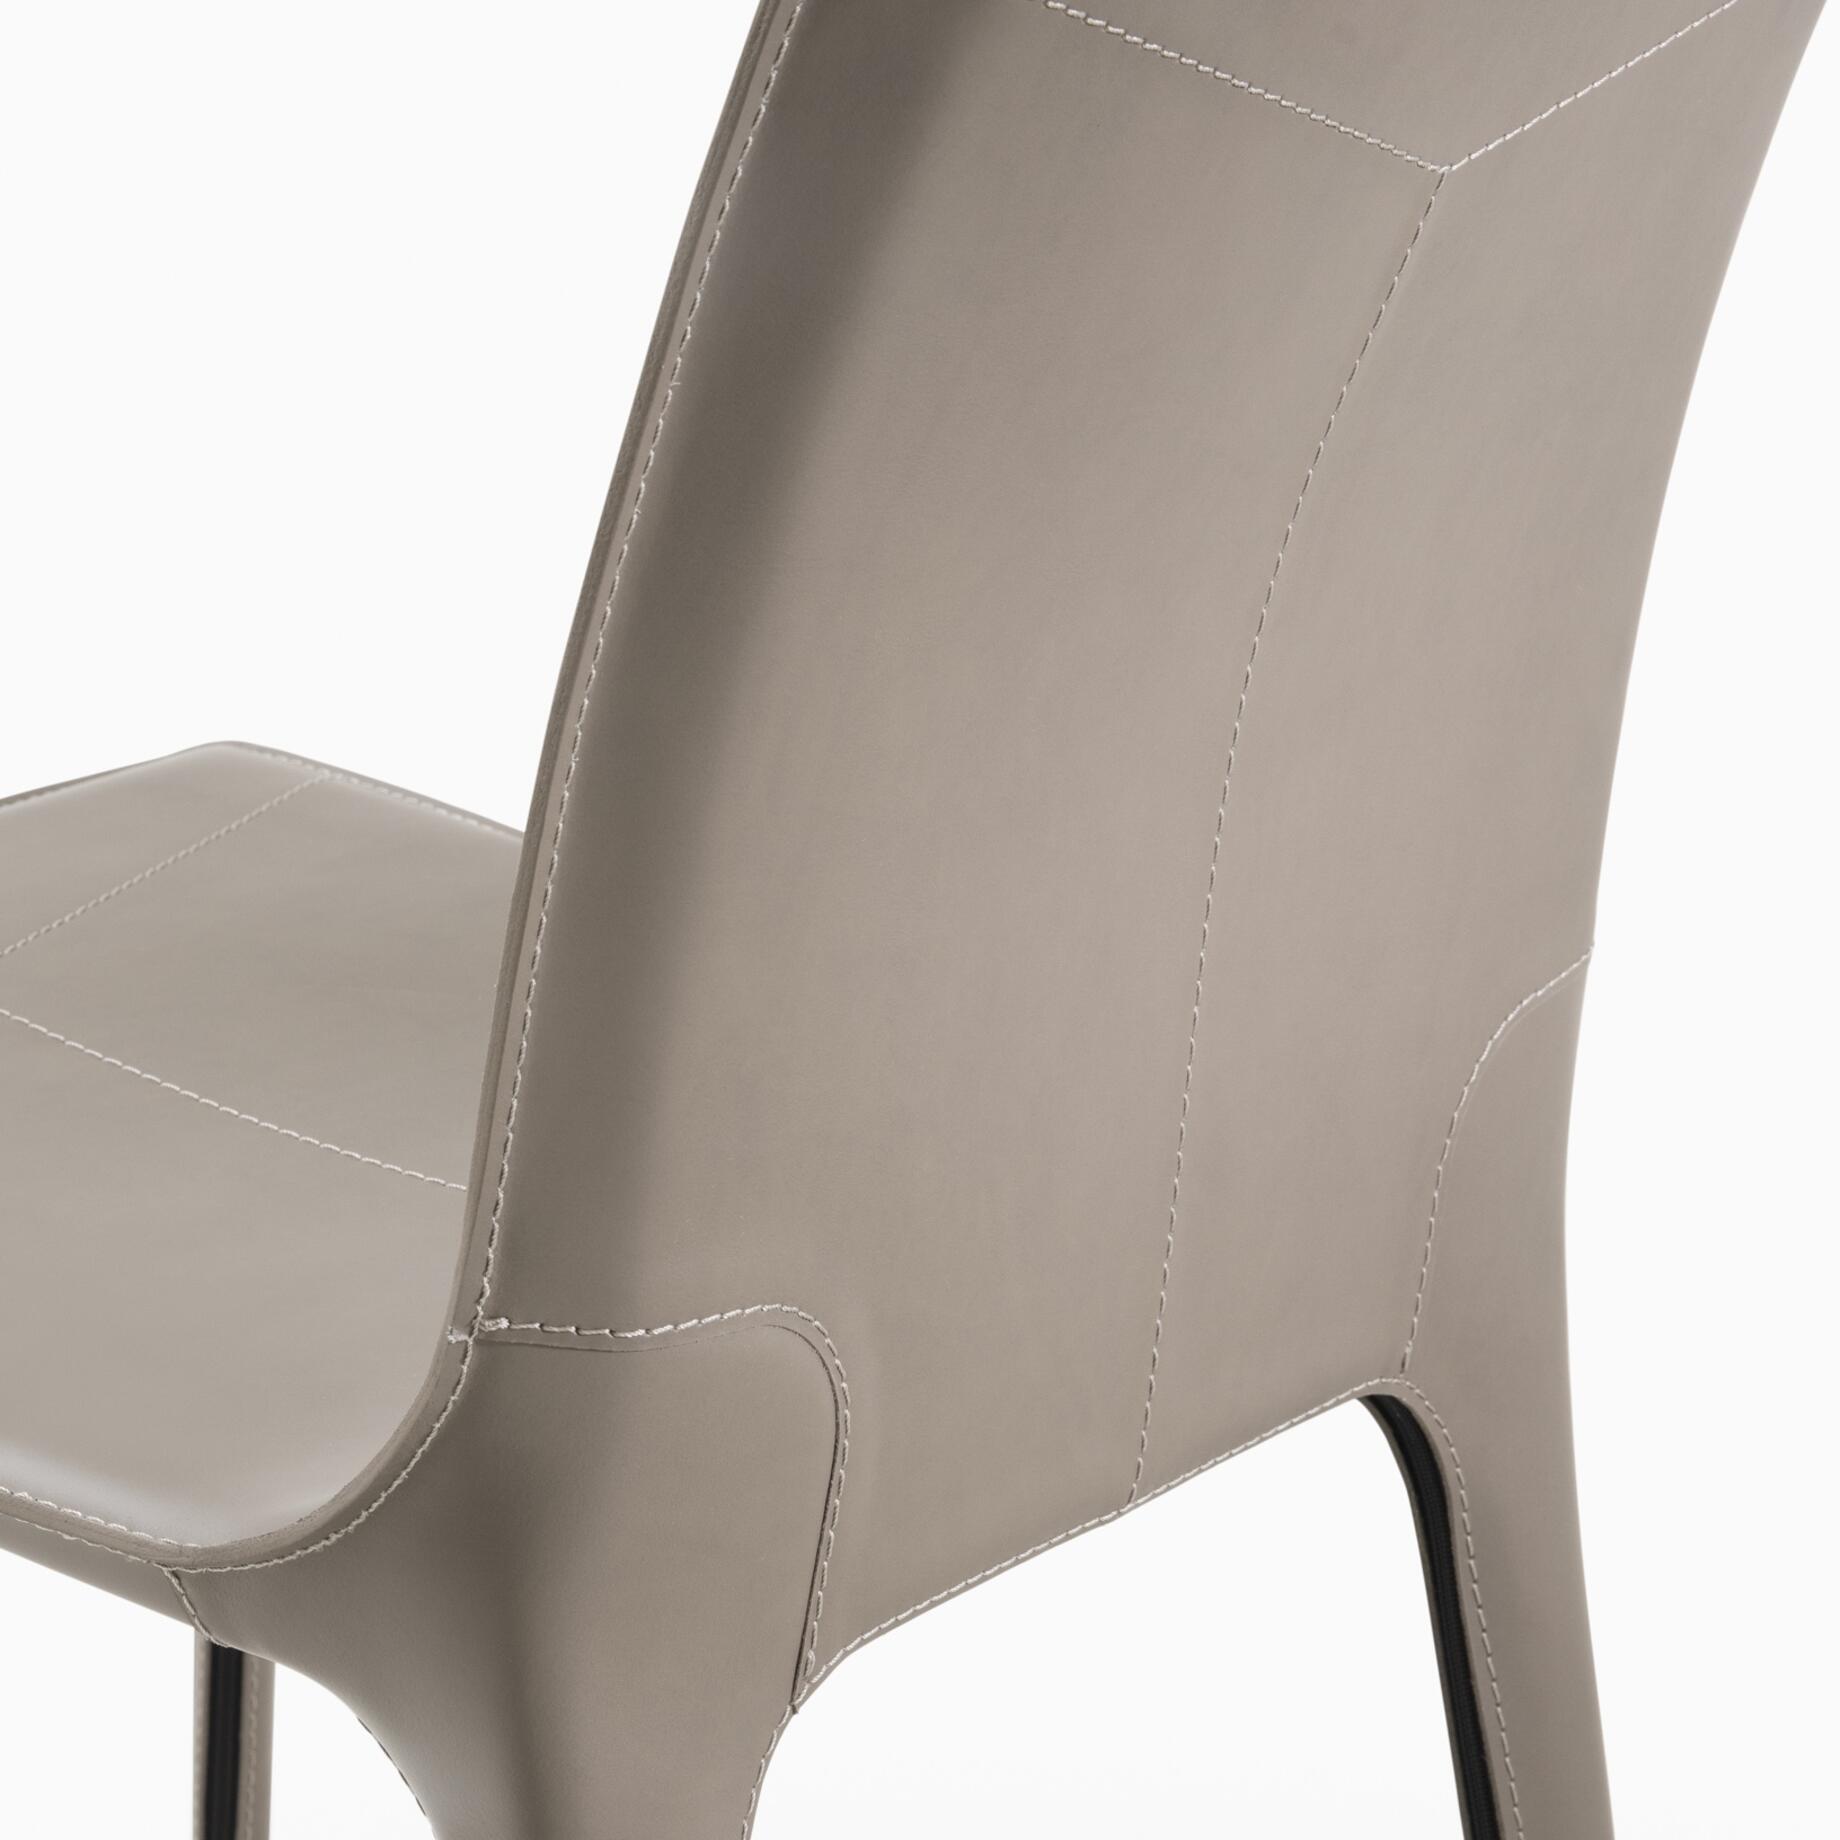 Adriatic Dining Side Chair